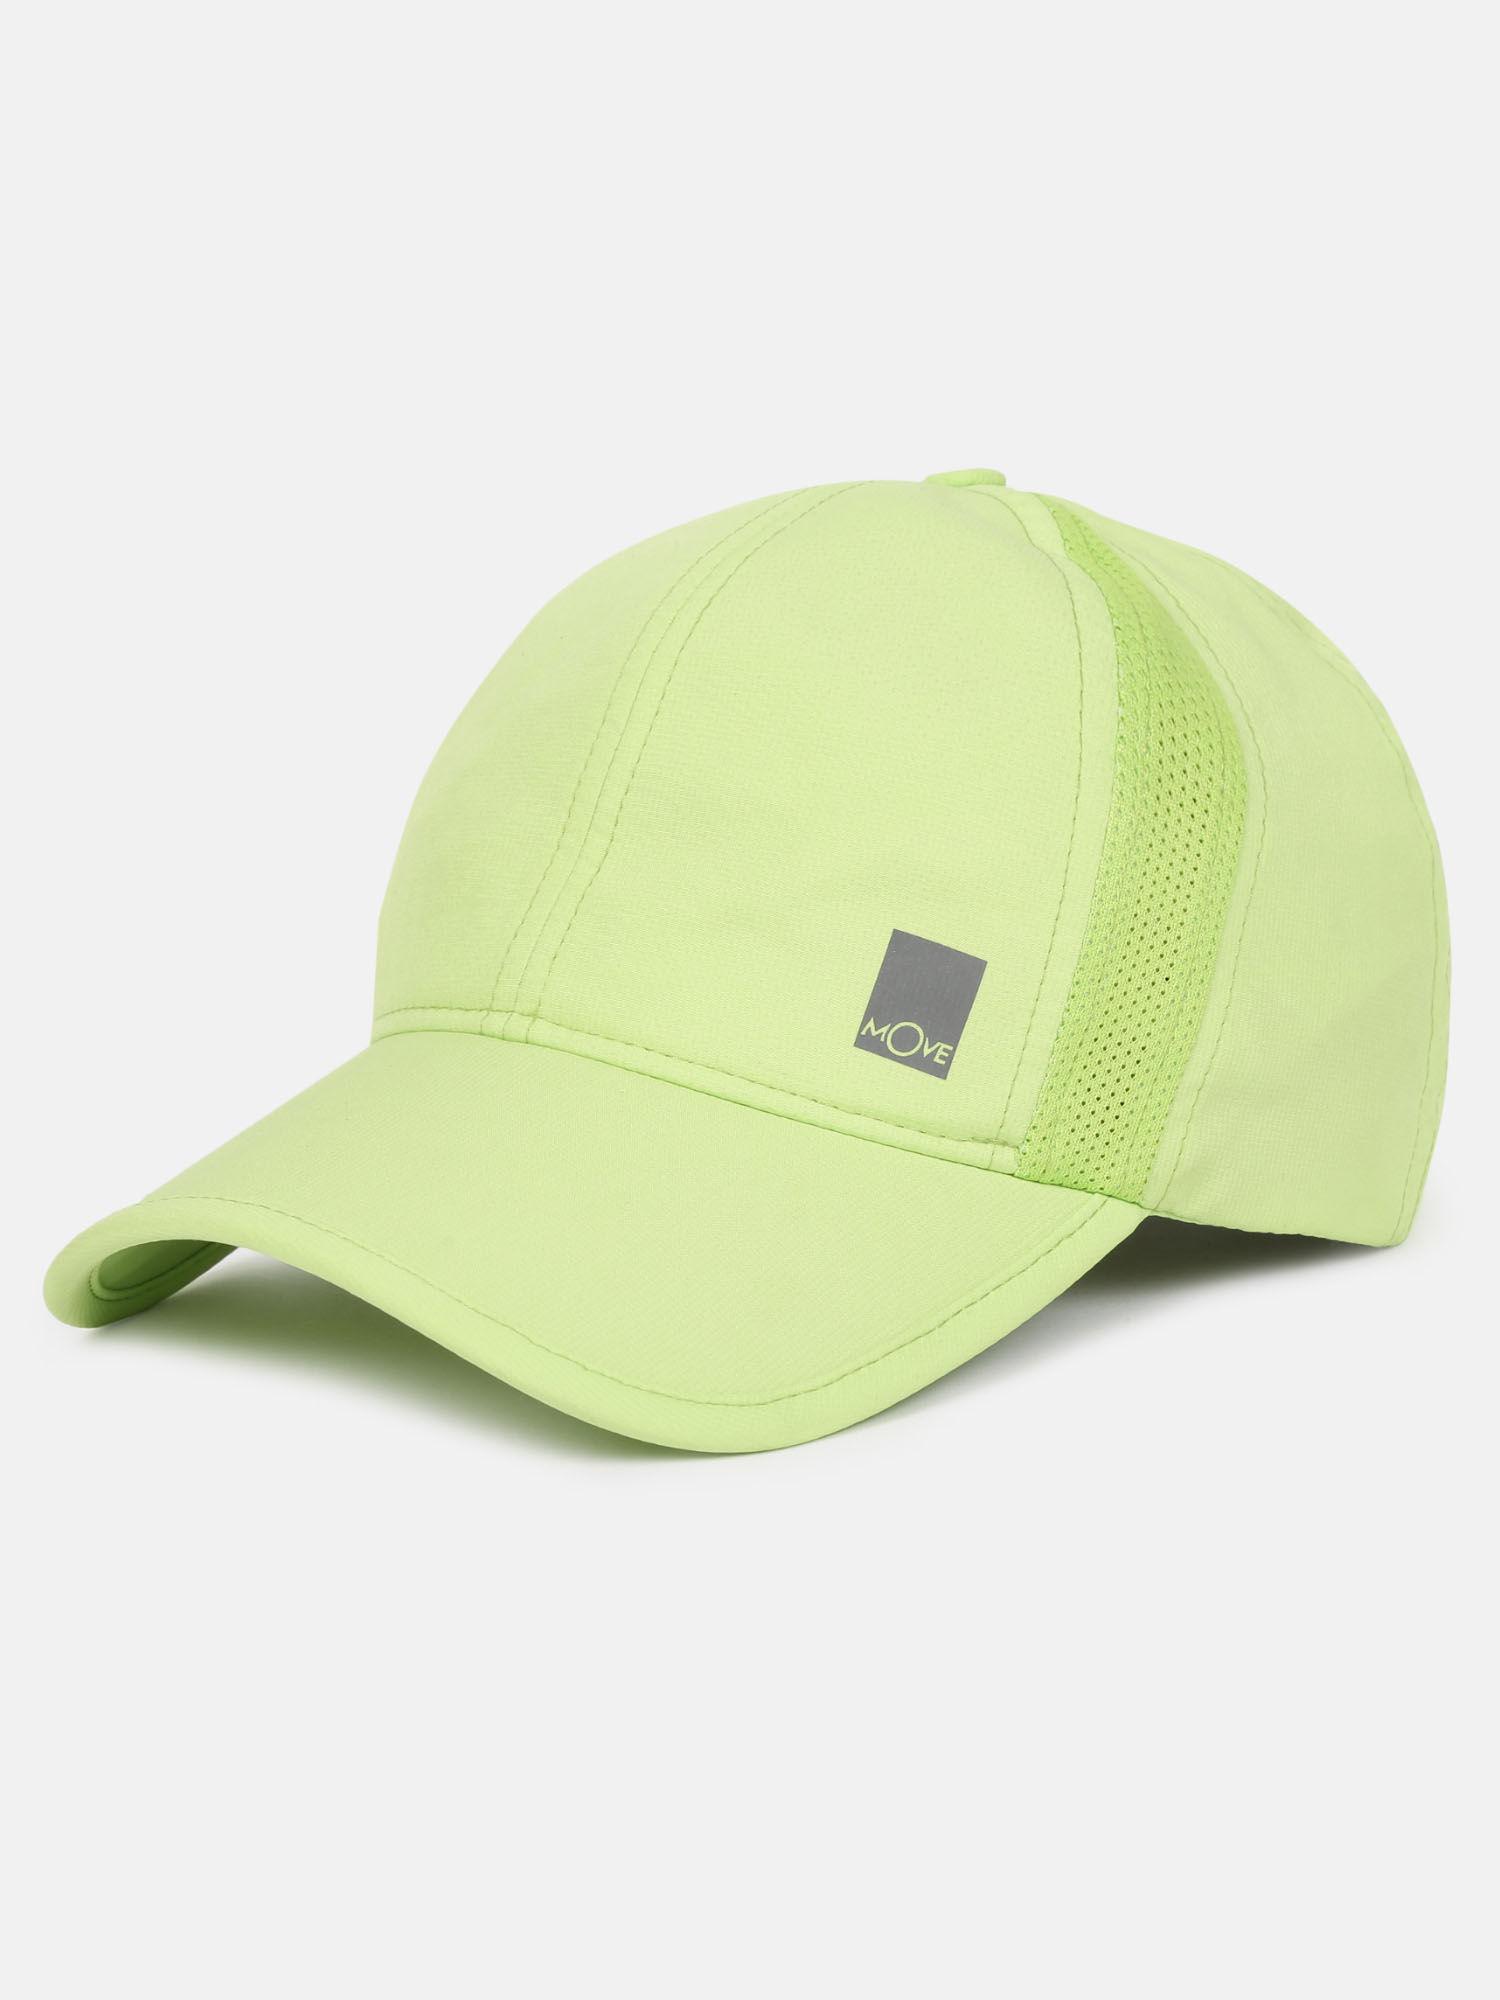 cp21 polyester solid cap with adjustable back closure and stay dry green glow